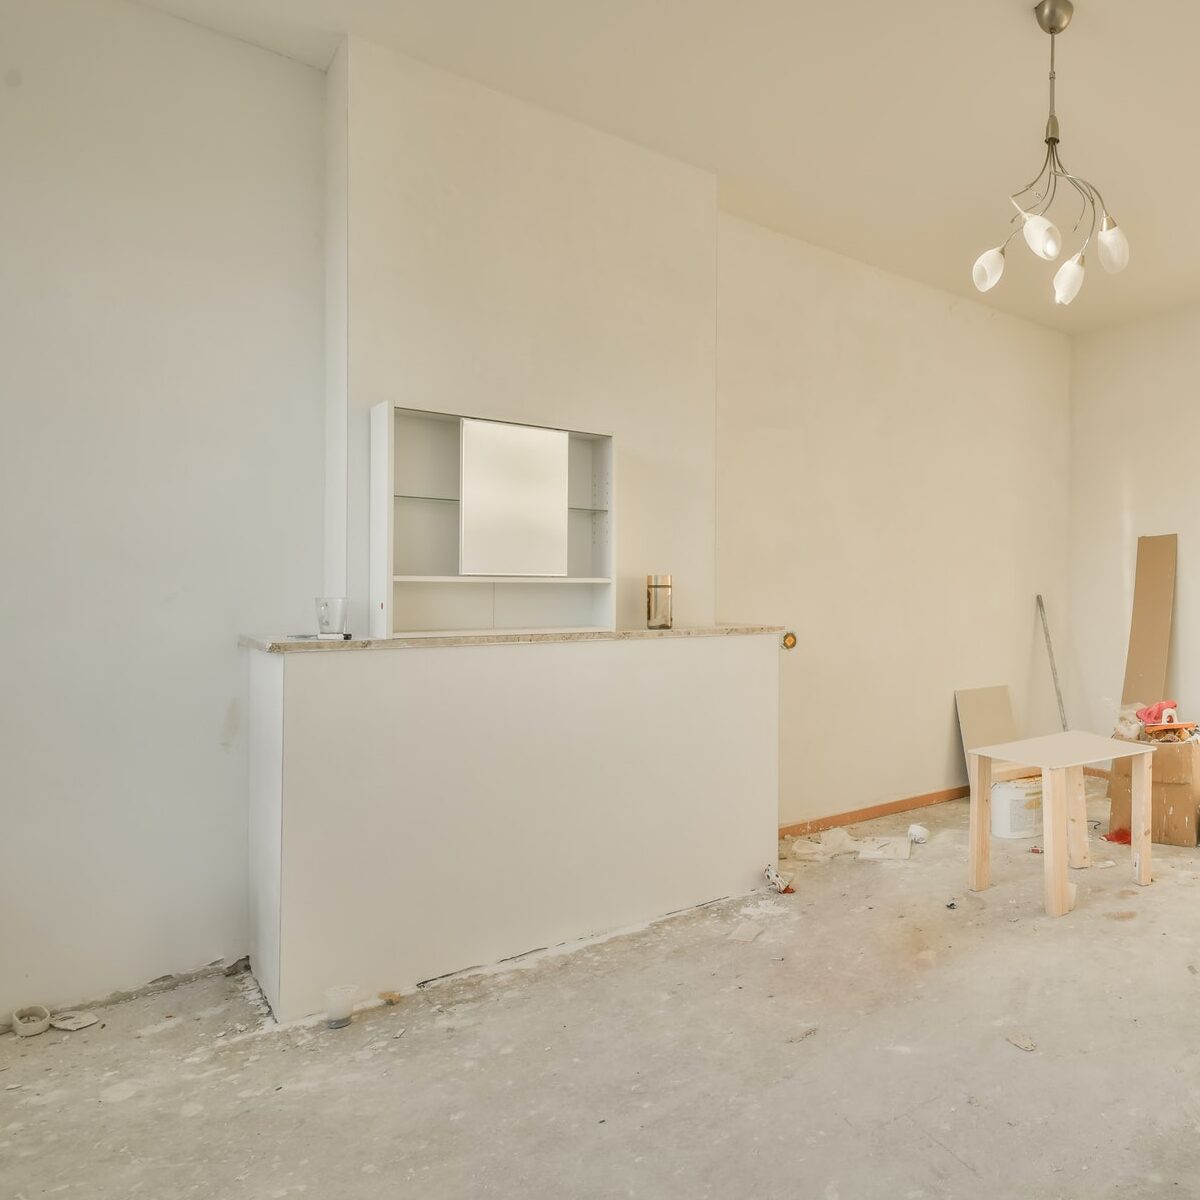 A spacious room under renovation